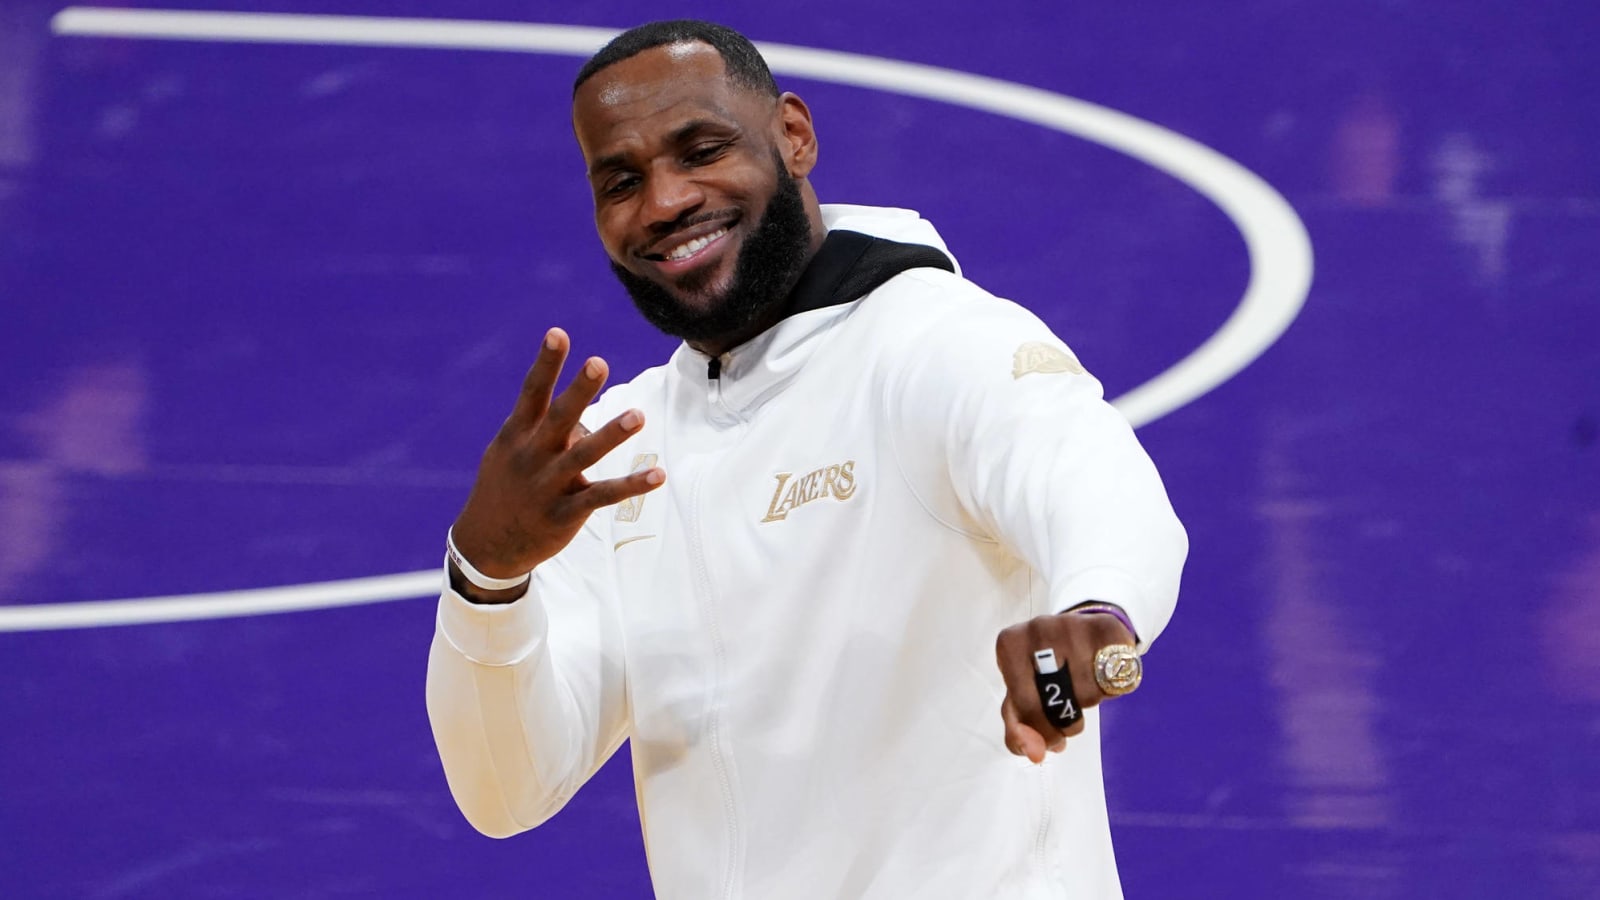 LeBron James doesn't mind having a game on his birthday 🎉🎂 — PSA:  @clutchpoints just went private. 👀 — #nba #lakers #lebronjames